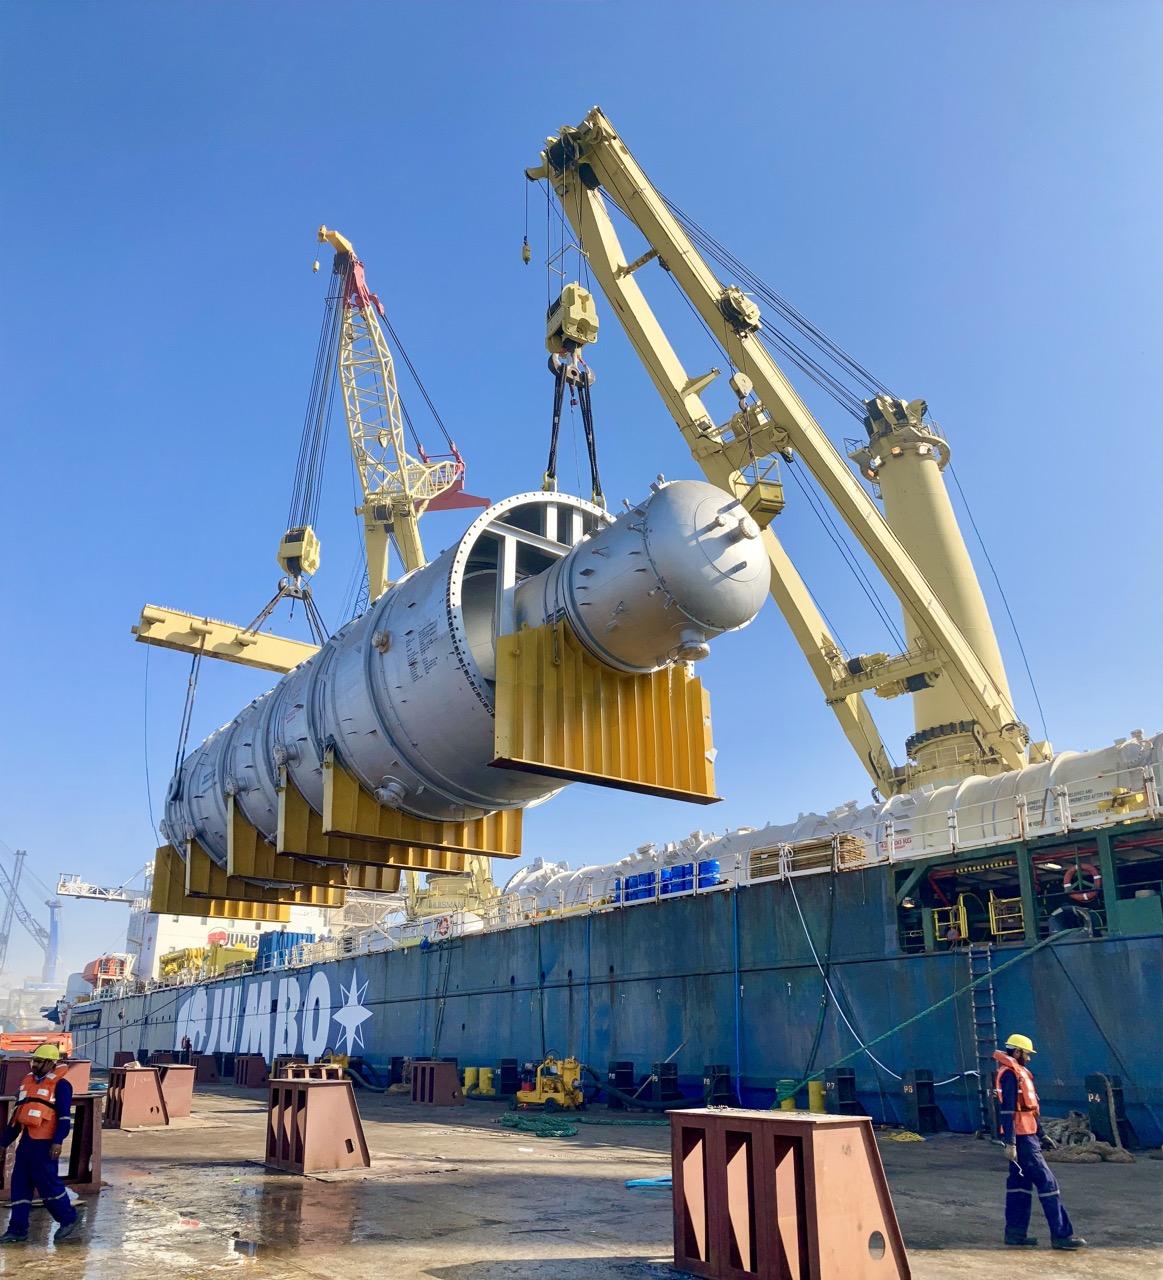 Fleet flexibility is key when moving 450,000 frt for Basrah refinery upgrade project